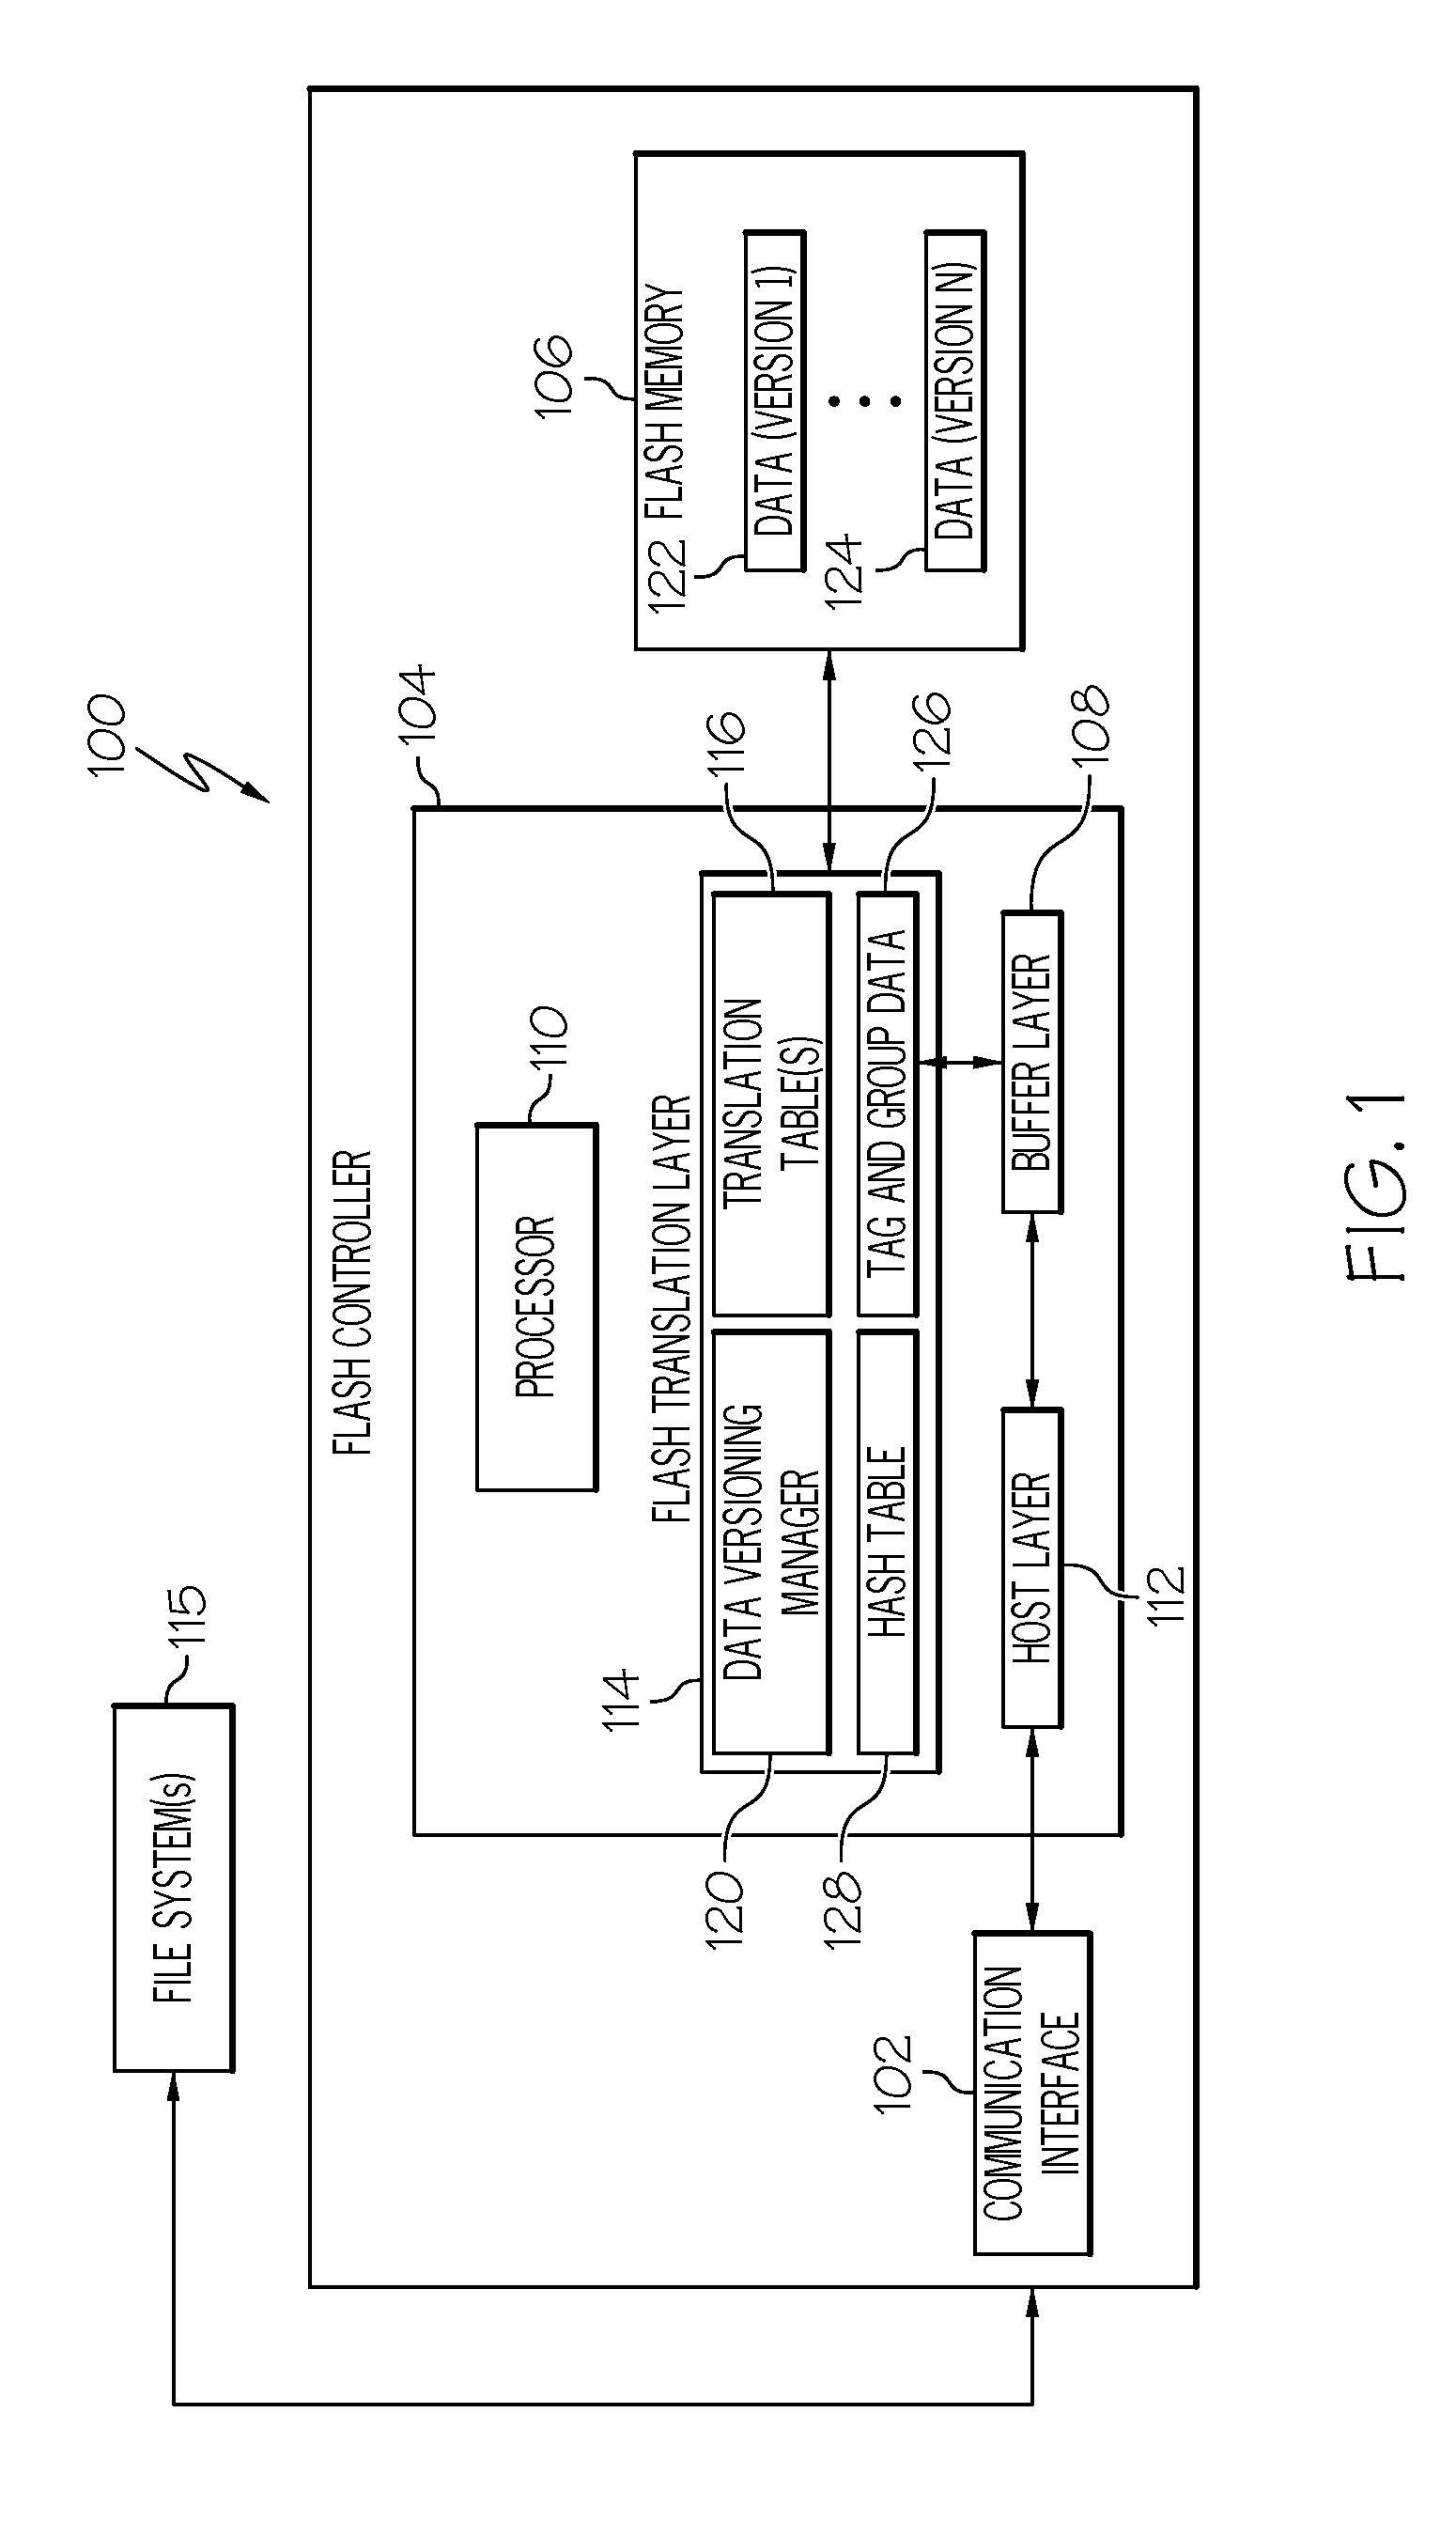 Maintaining versions of data in solid state memory